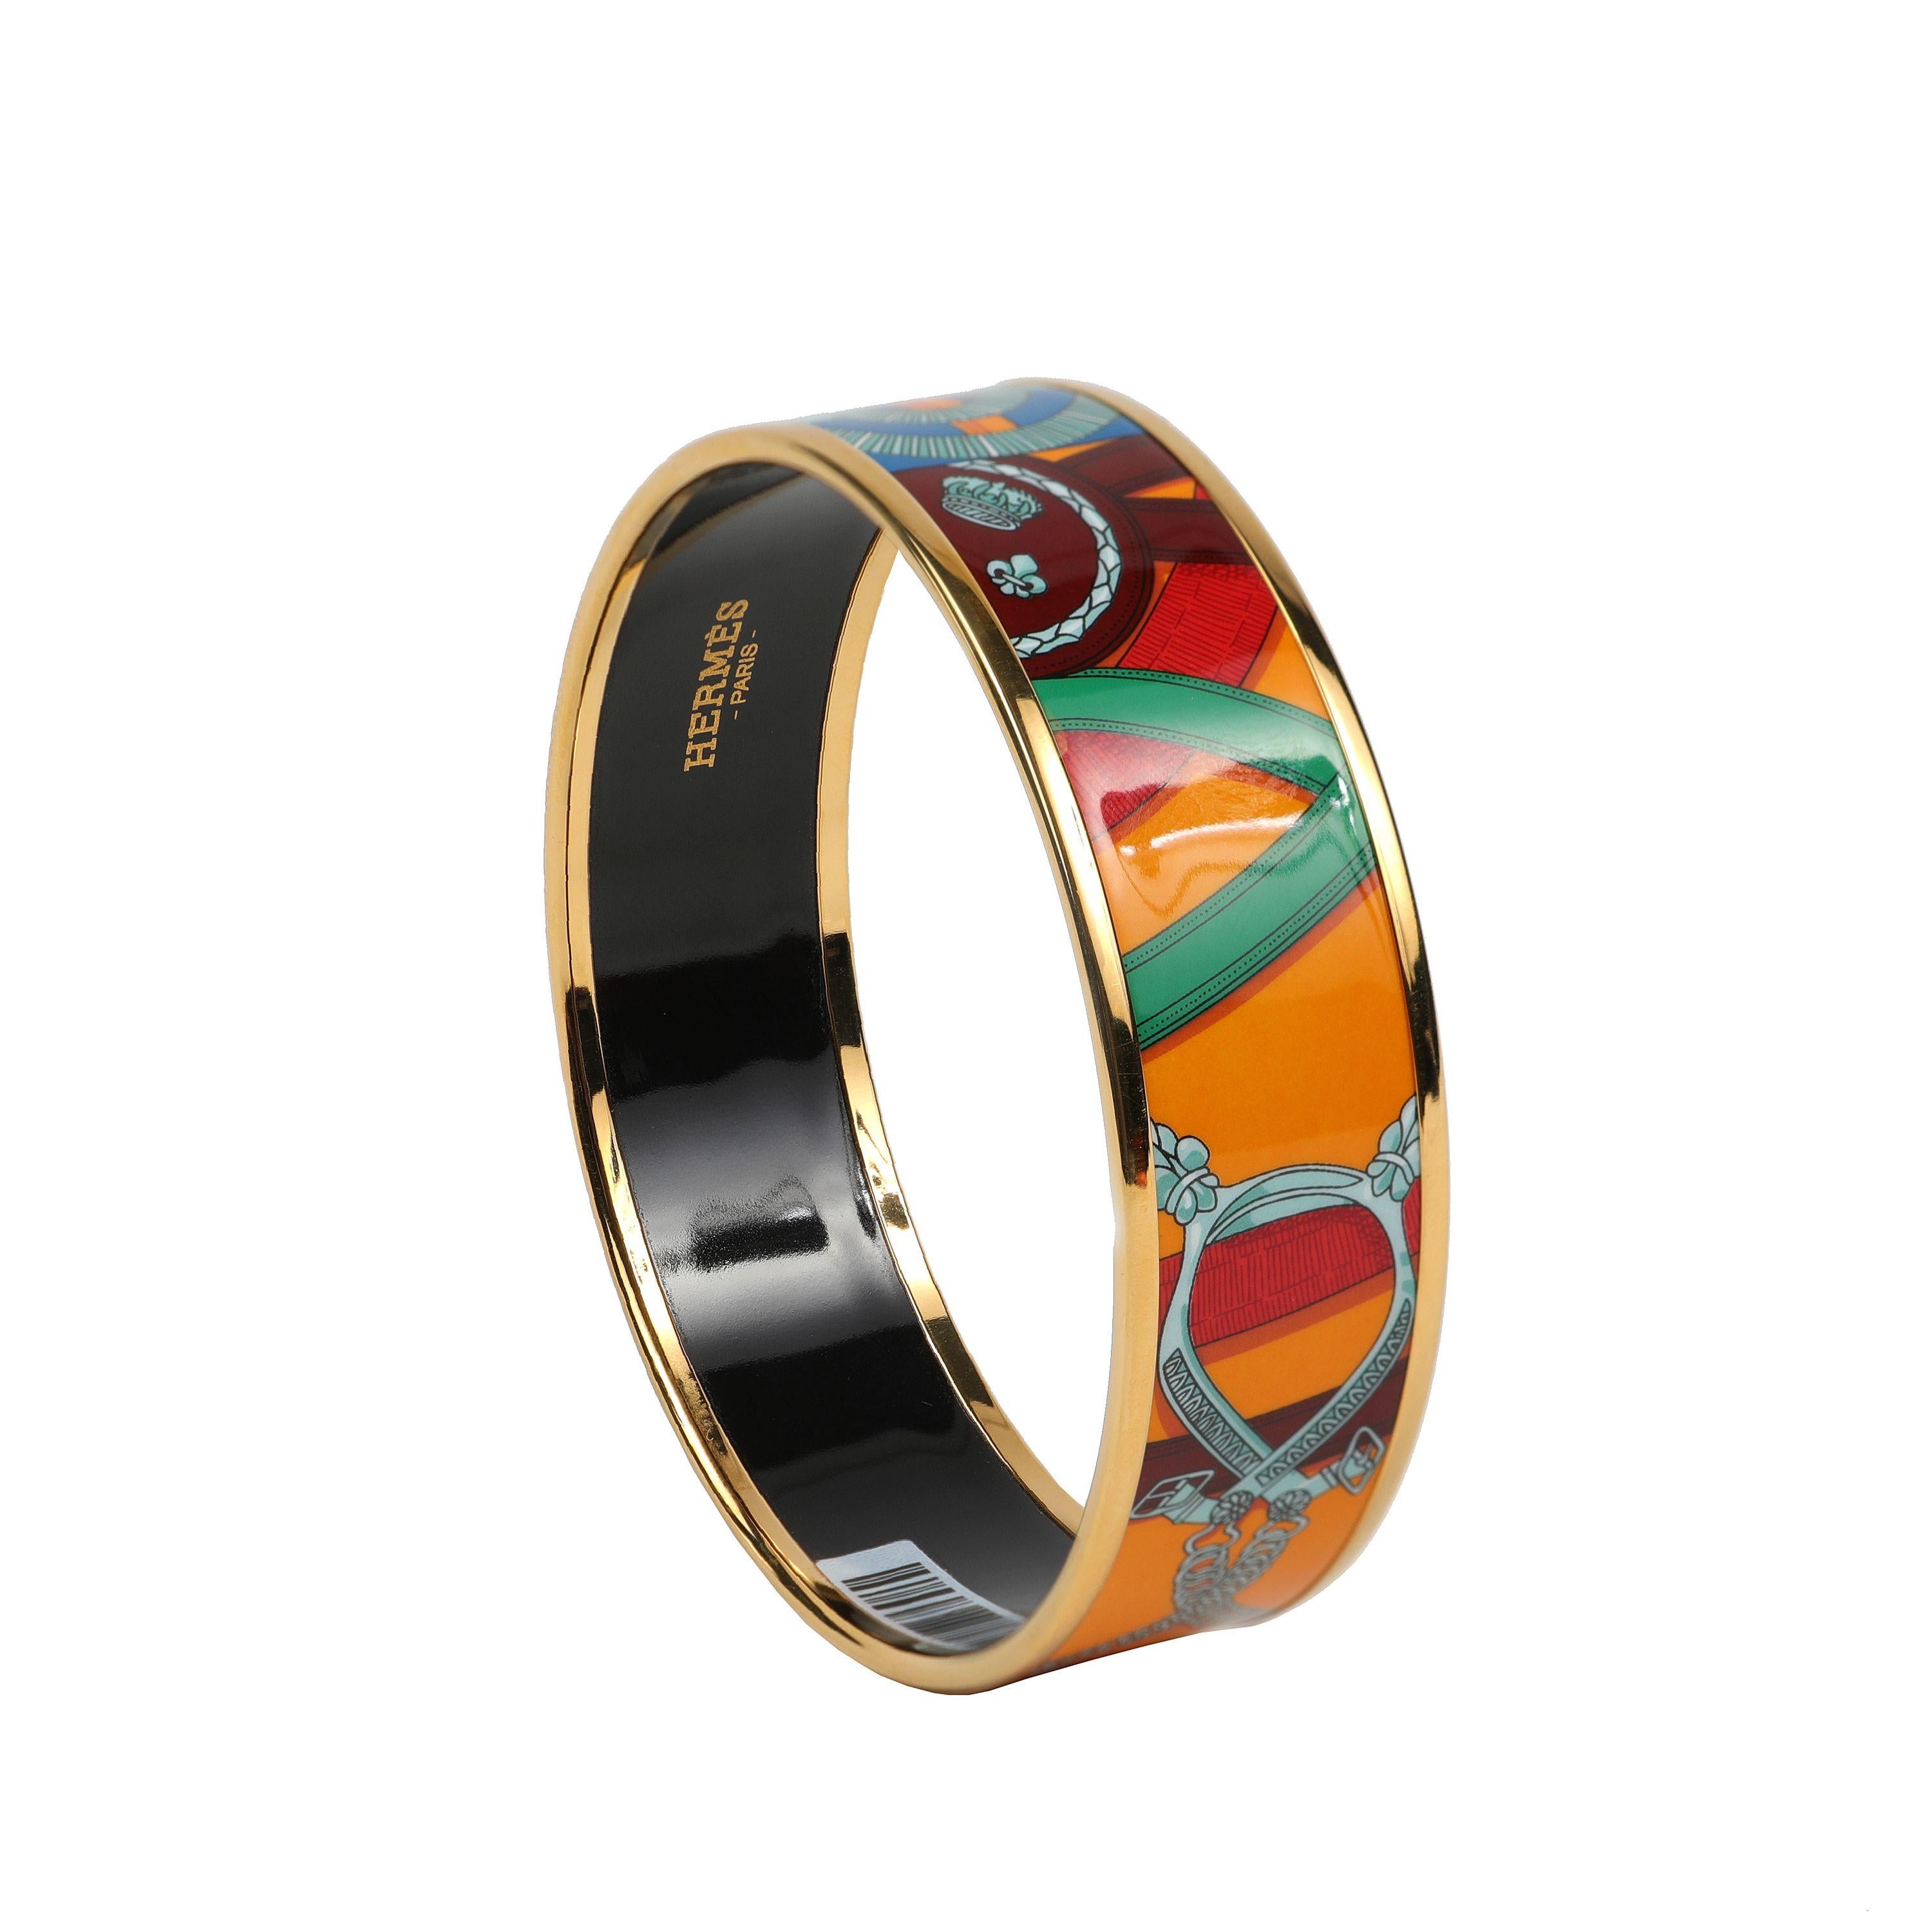 This authentic Hermès Orange and Blue Enamel Bracelet is new.  Brightly colored enamel bangle, equestrian theme.  Box or pouch included.

PBF 13985
